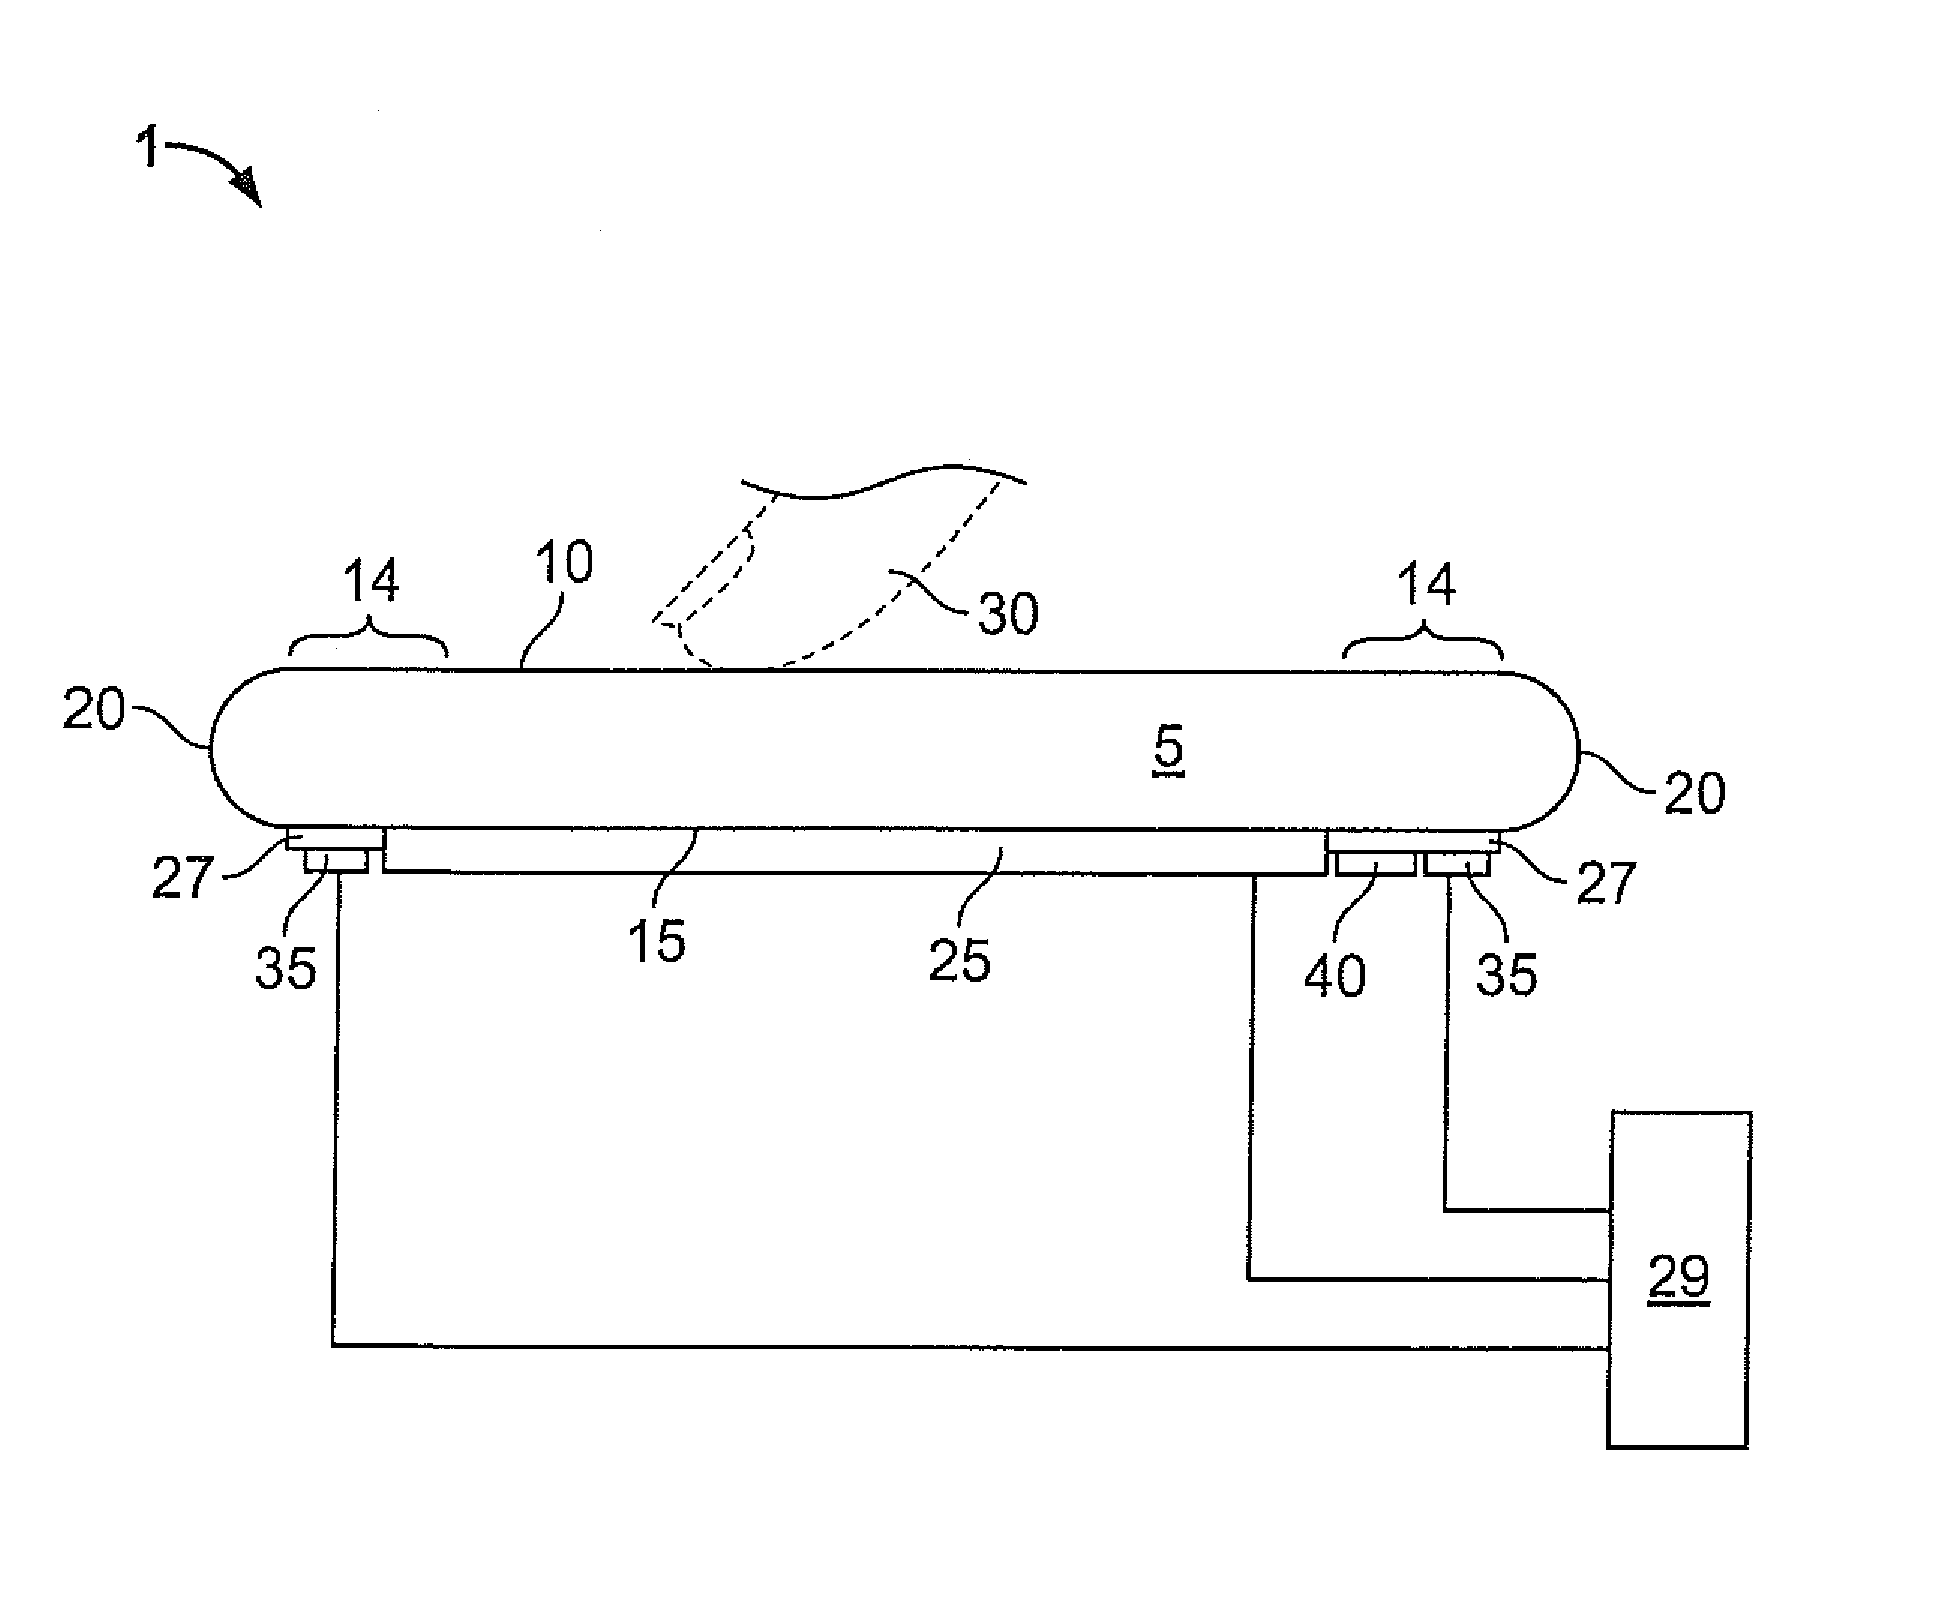 Acoustic touch apparatus